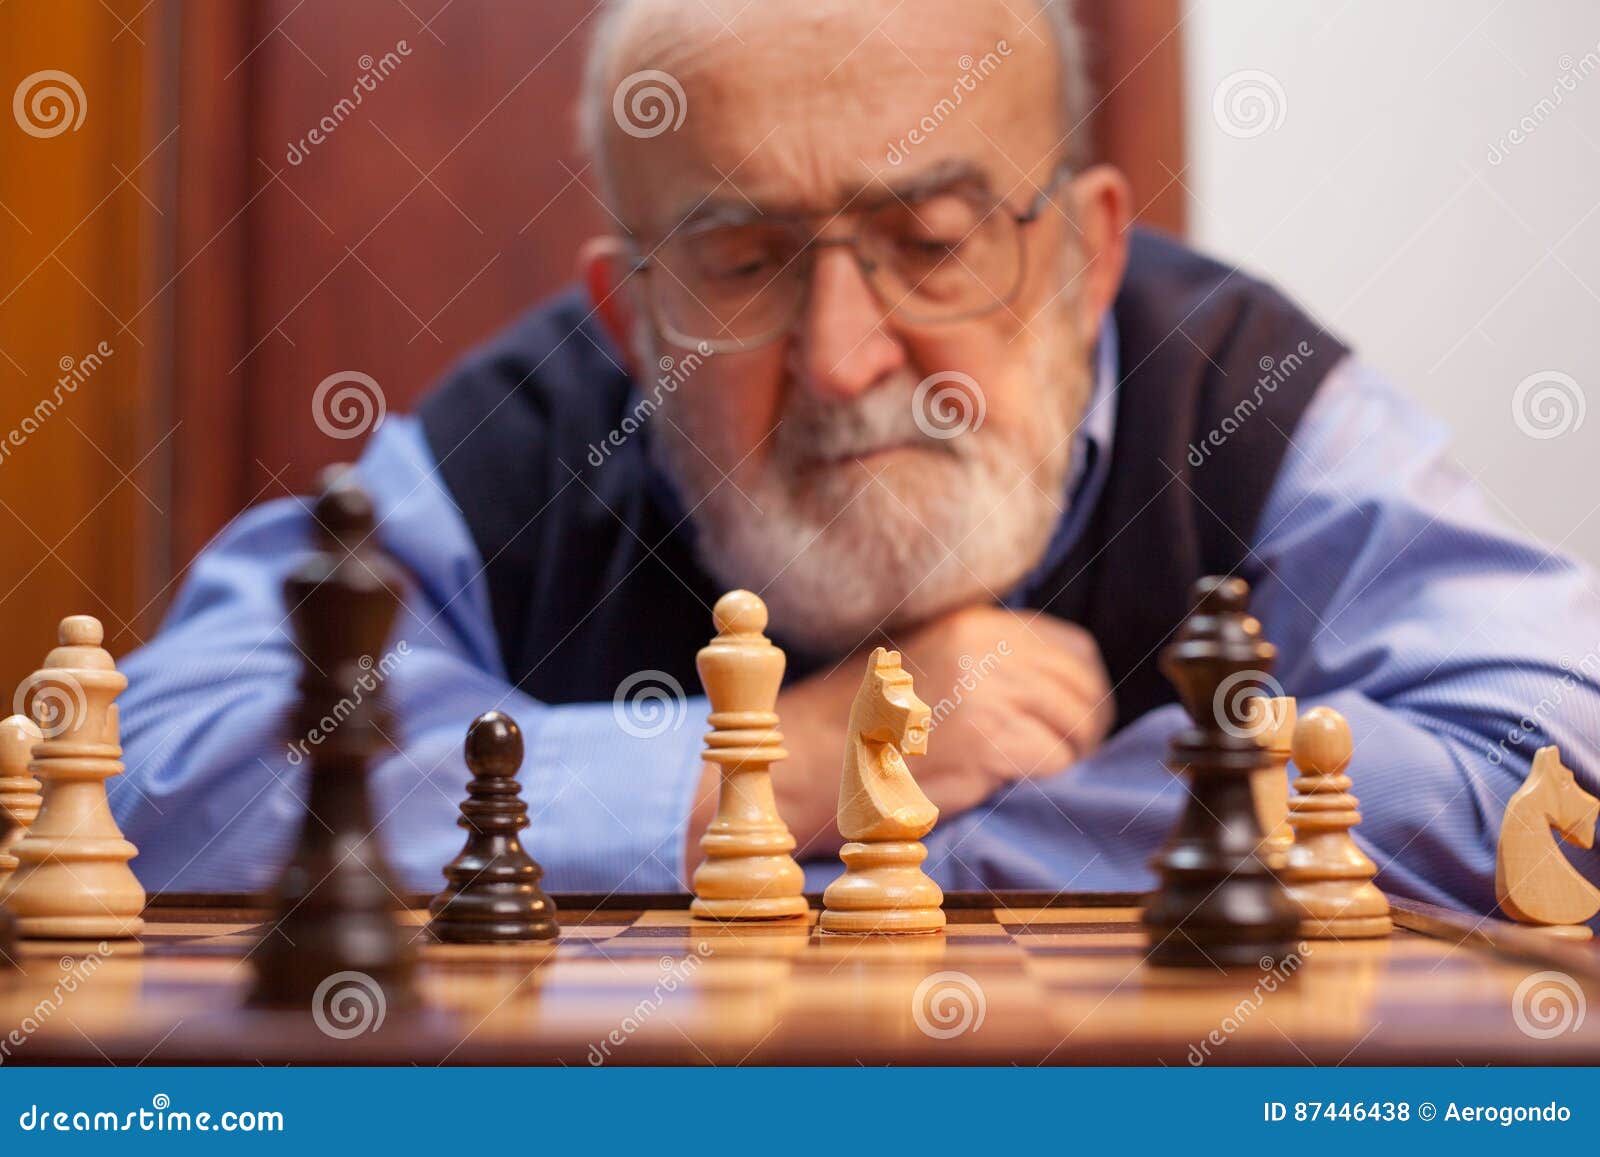 Old Man Playing Chess - Stock Photos